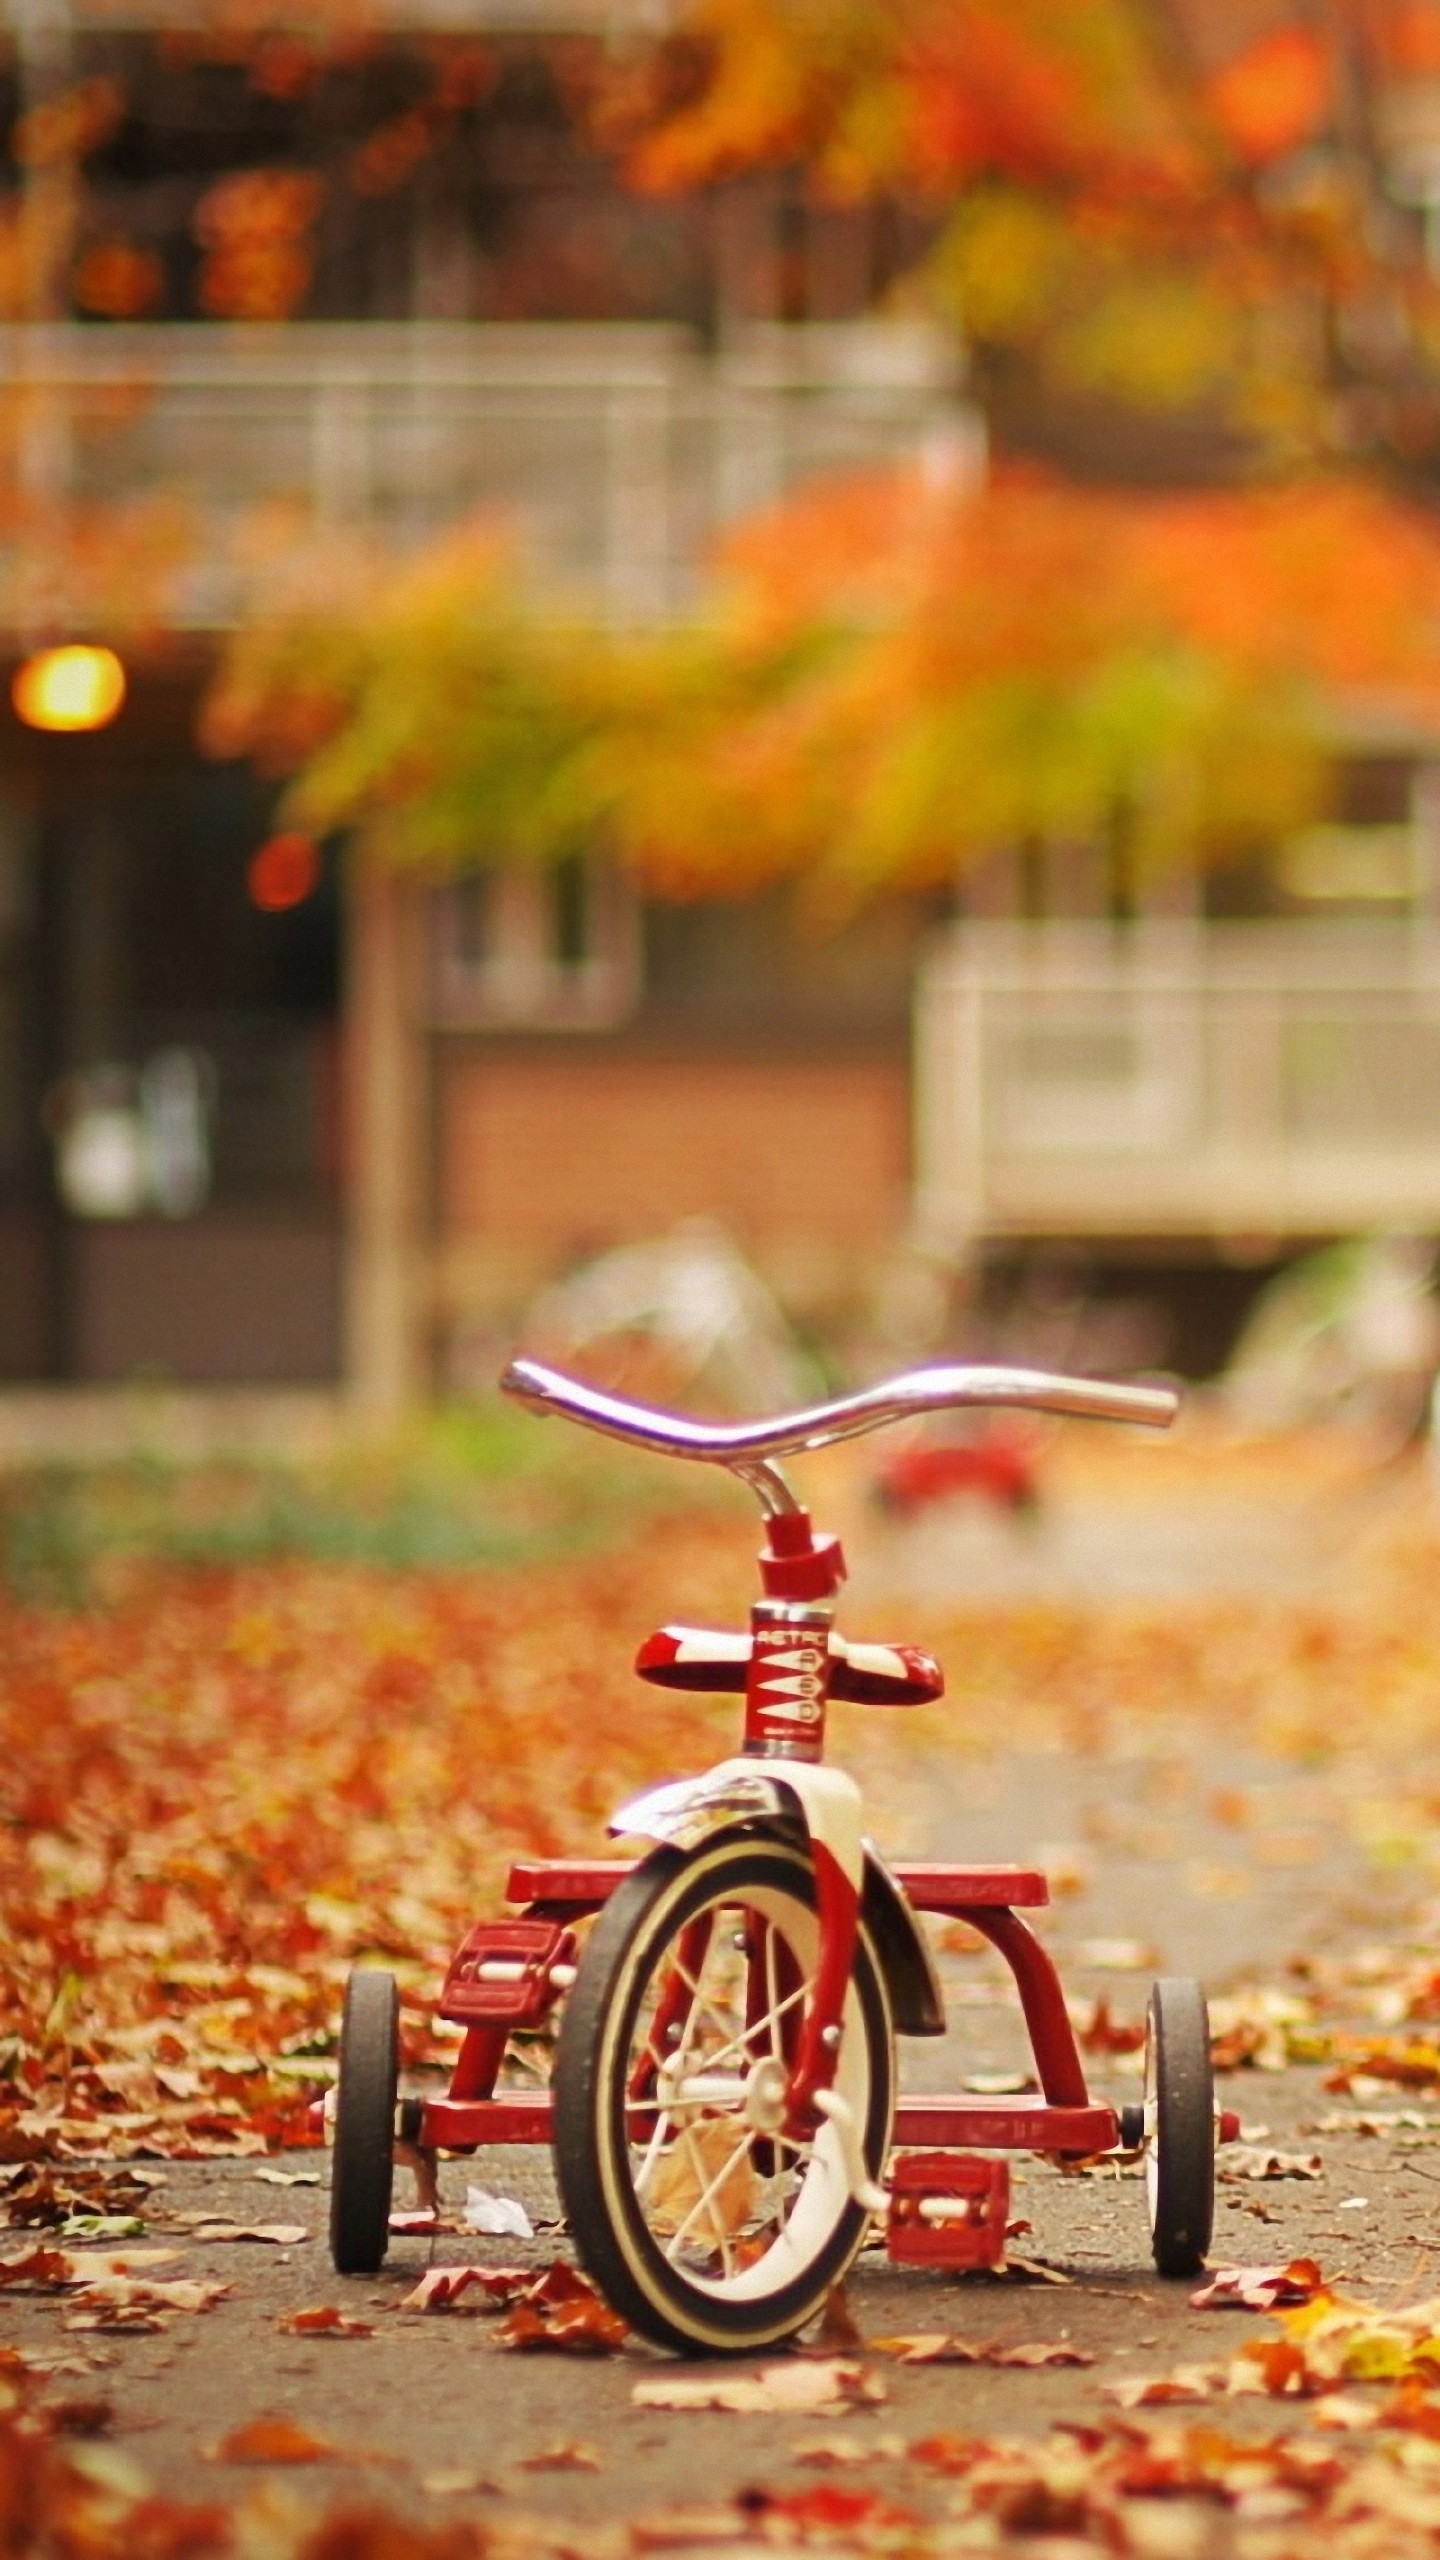 mobile wallpapers hd for samsung,bicycle,vehicle,bicycle wheel,orange,autumn